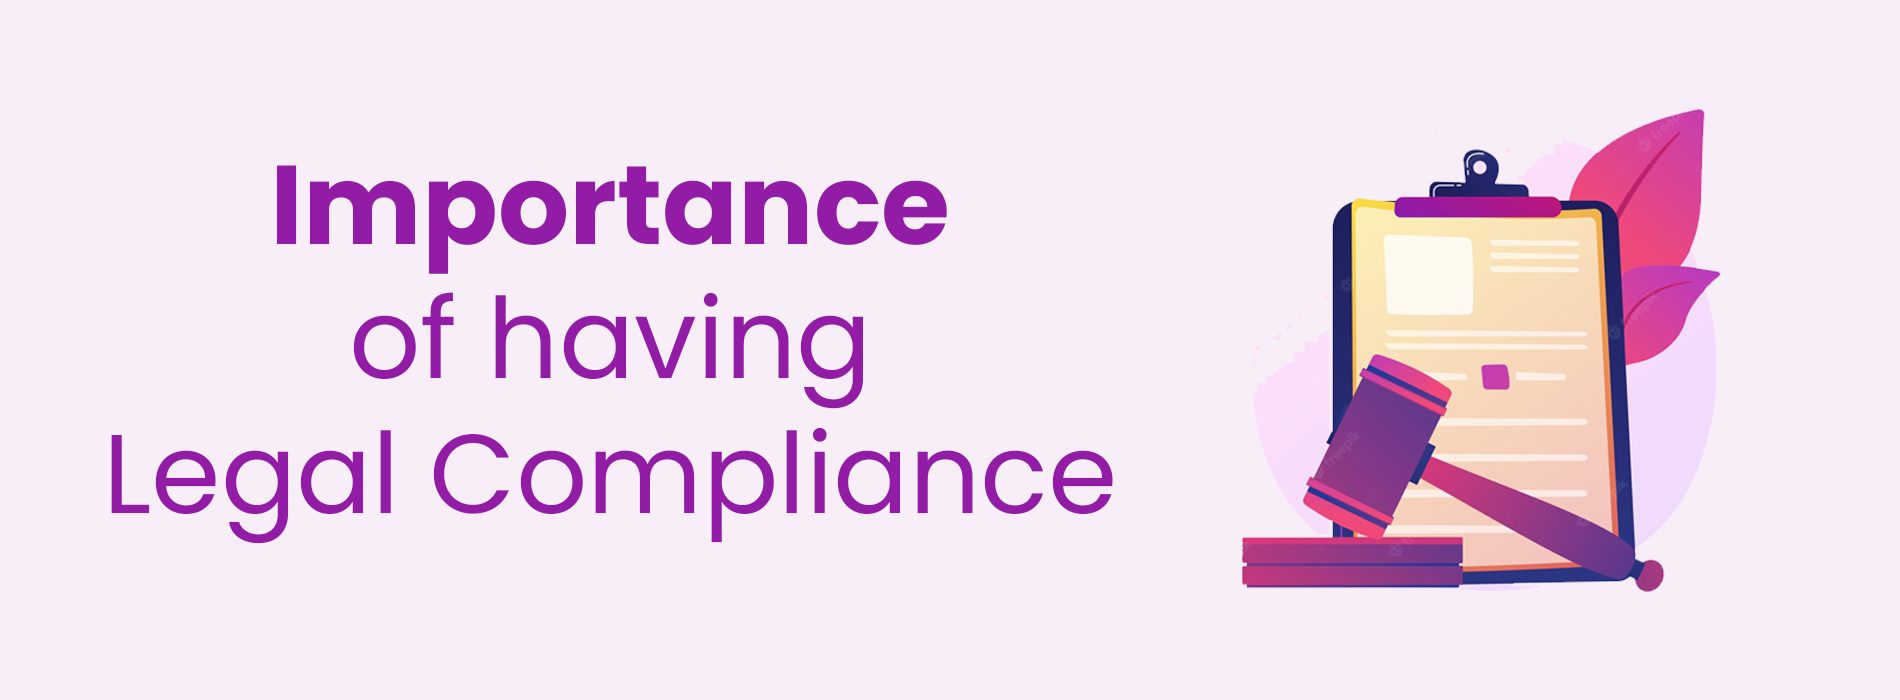 Importance of Having Legal Compliance